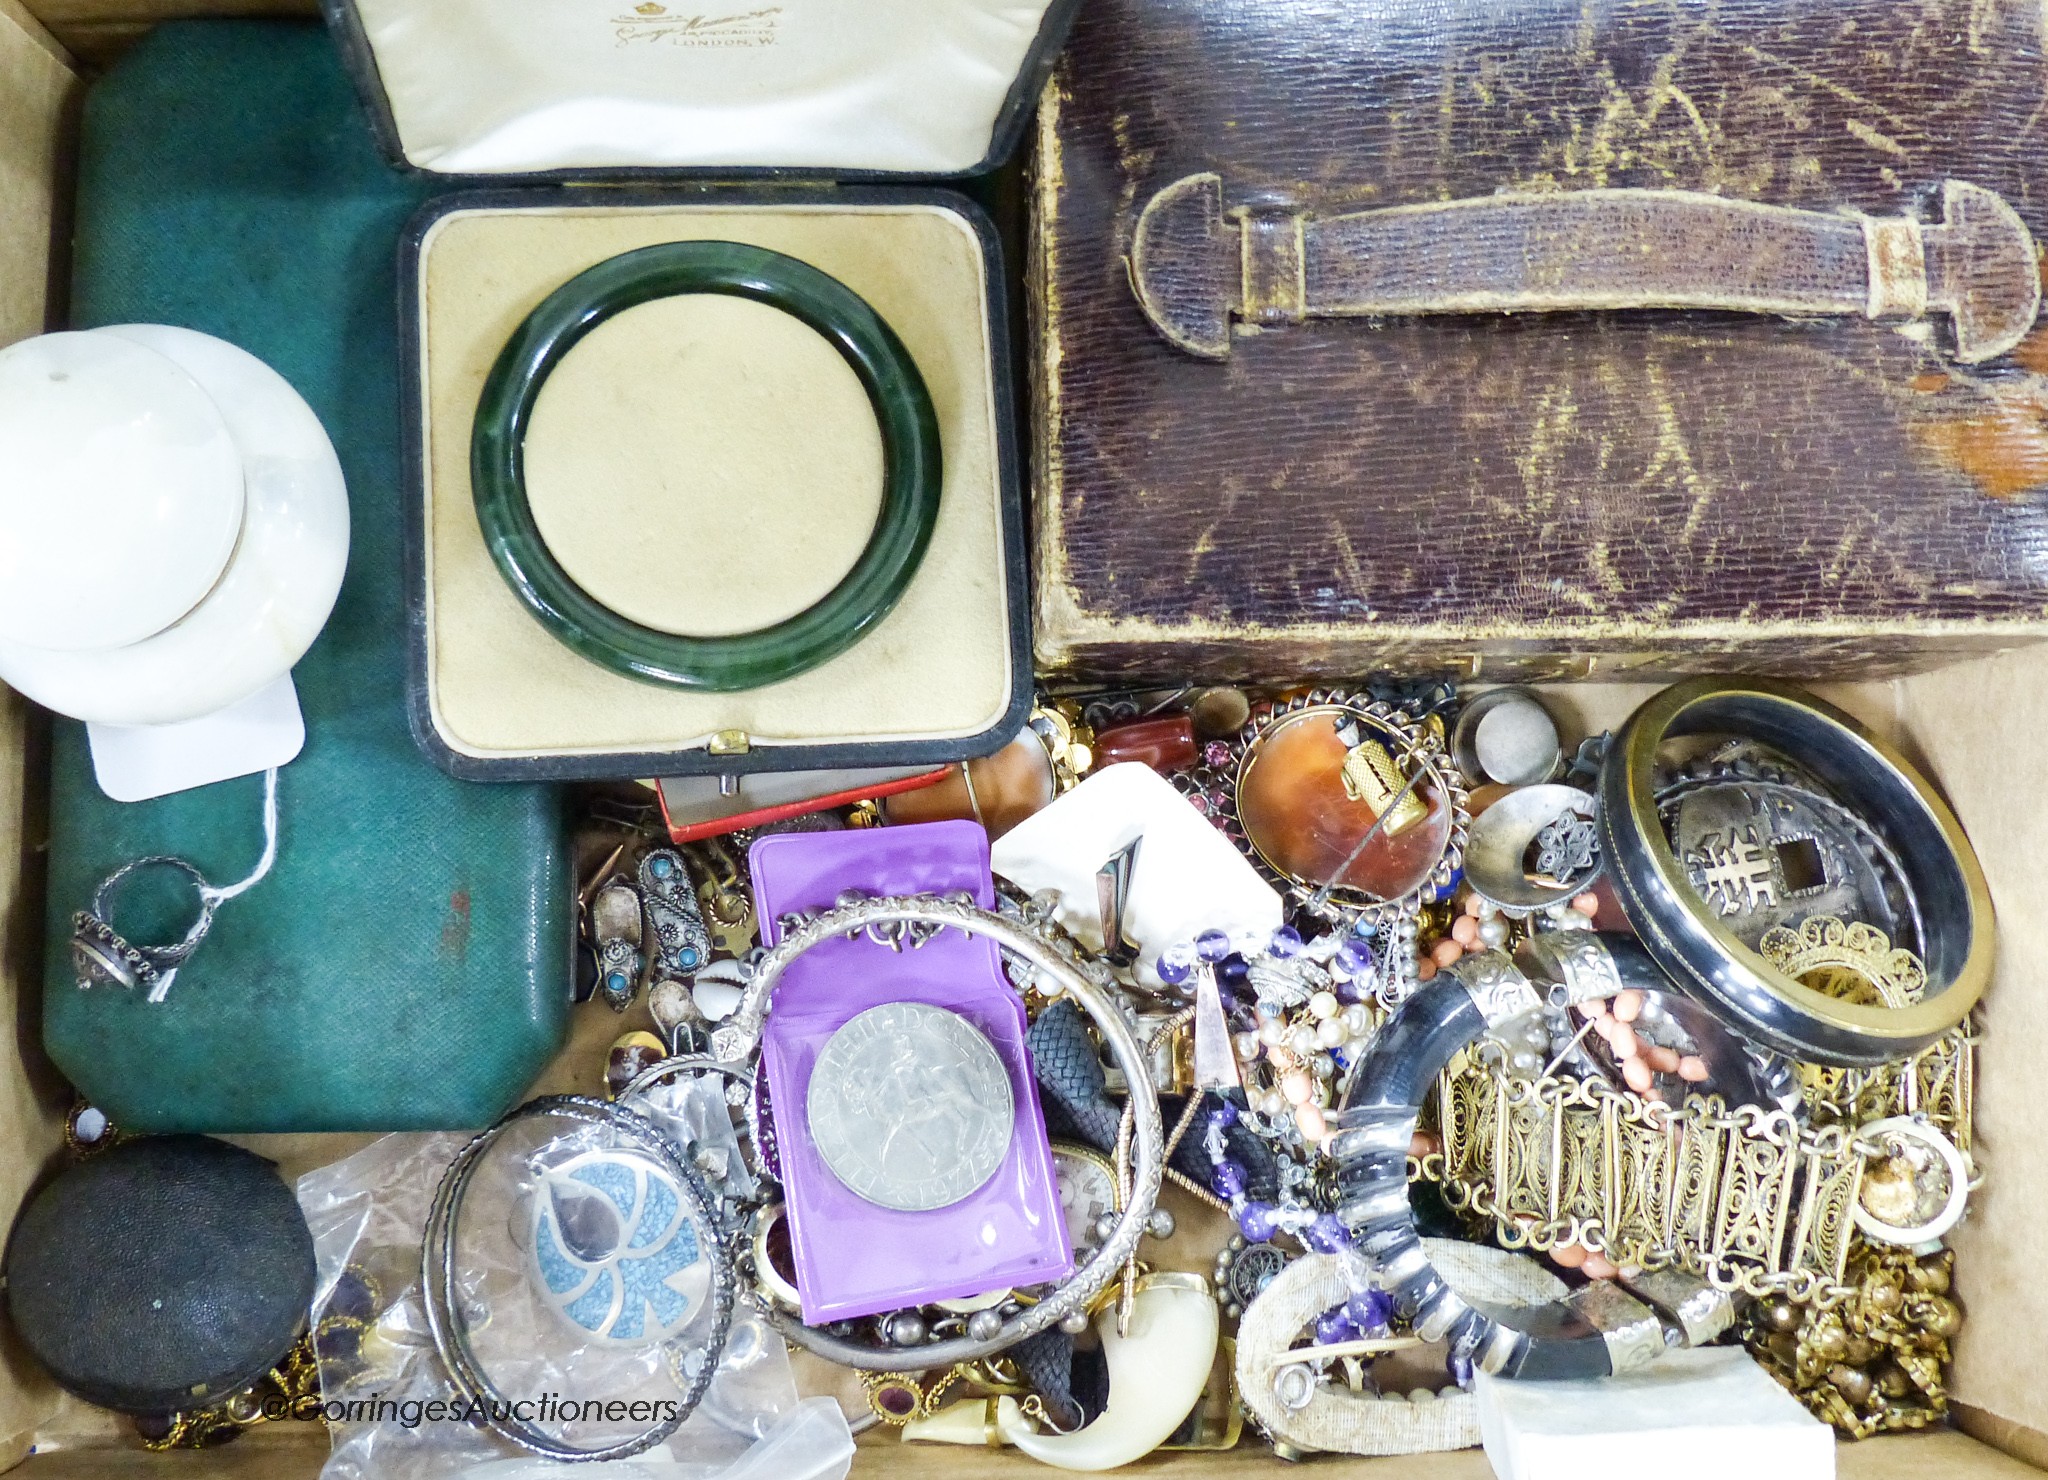 A quantity of assorted 19th century and later jewellery, including 9ct gold cufflink, enamelled dress stud, garnet set jewellery, cameo brooches, Austro Hungarian earrings etc.